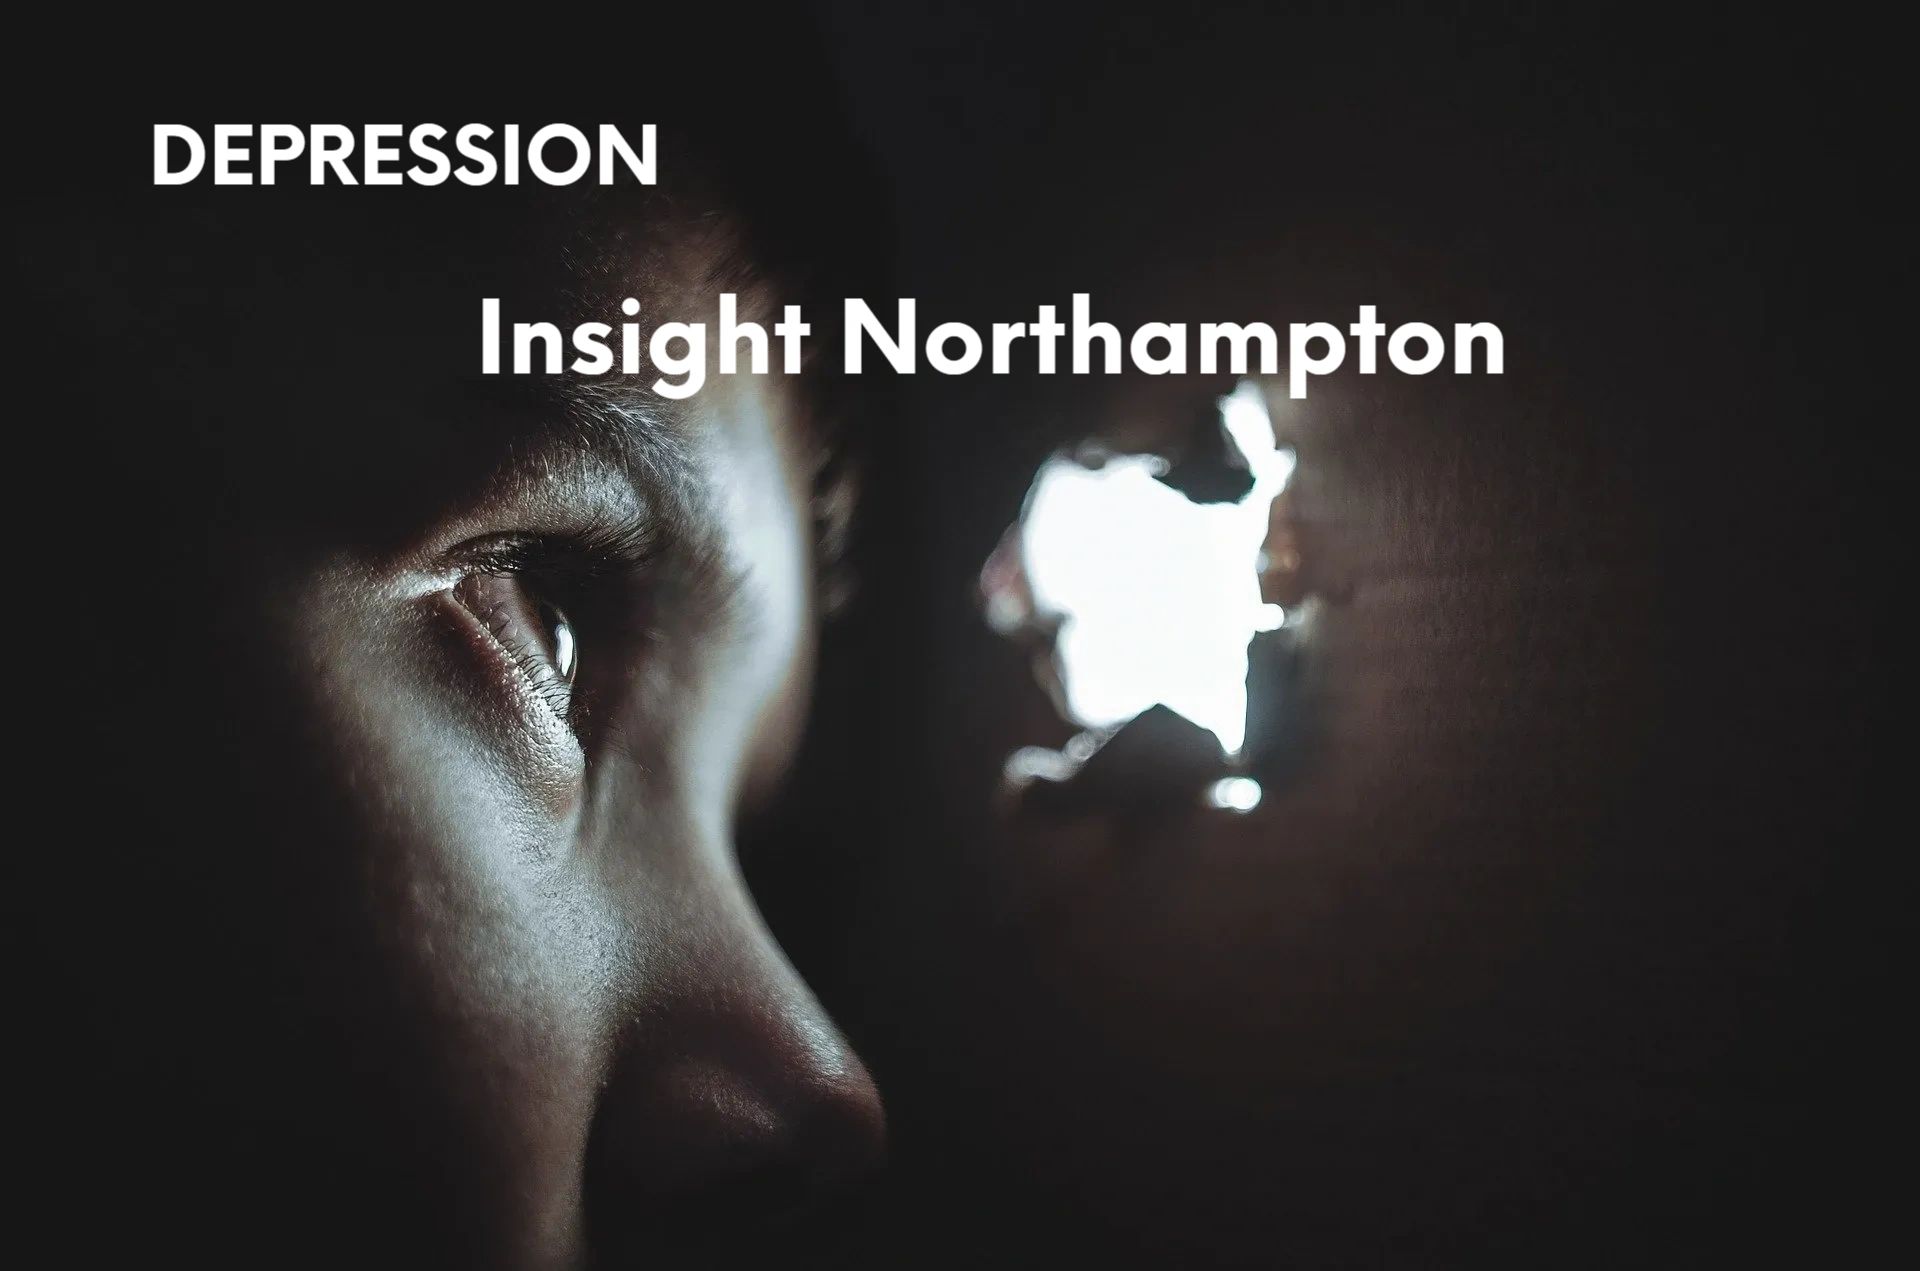 Insight Northampton can help you with depression - contact a registered counsellor who will help you